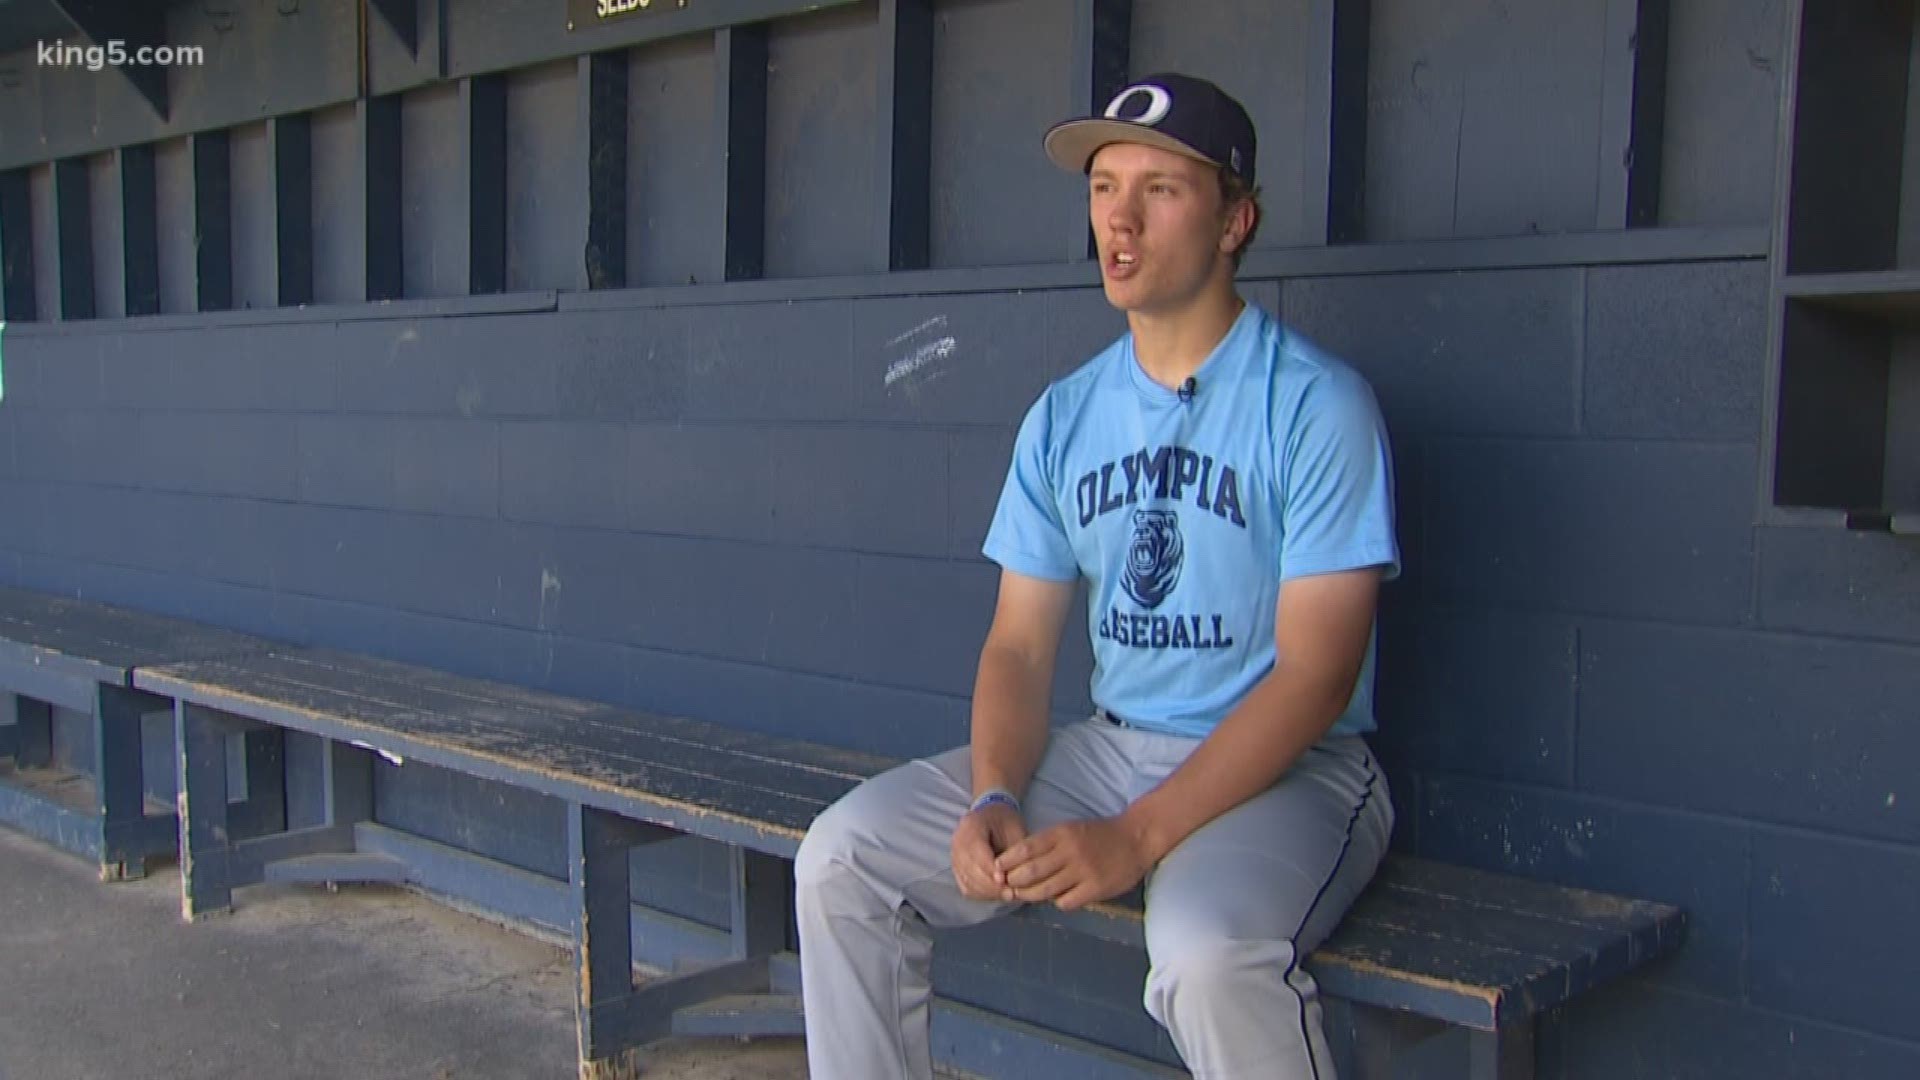 Olympia High School's baseball team is getting good at playing the underdog role. The team qualified for the state tournament for the first time in a decade, thanks in part to a standout player. South Bureau Chief Drew Mikkelsen introduces us to Michael Came, who has been underestimated his entire life.